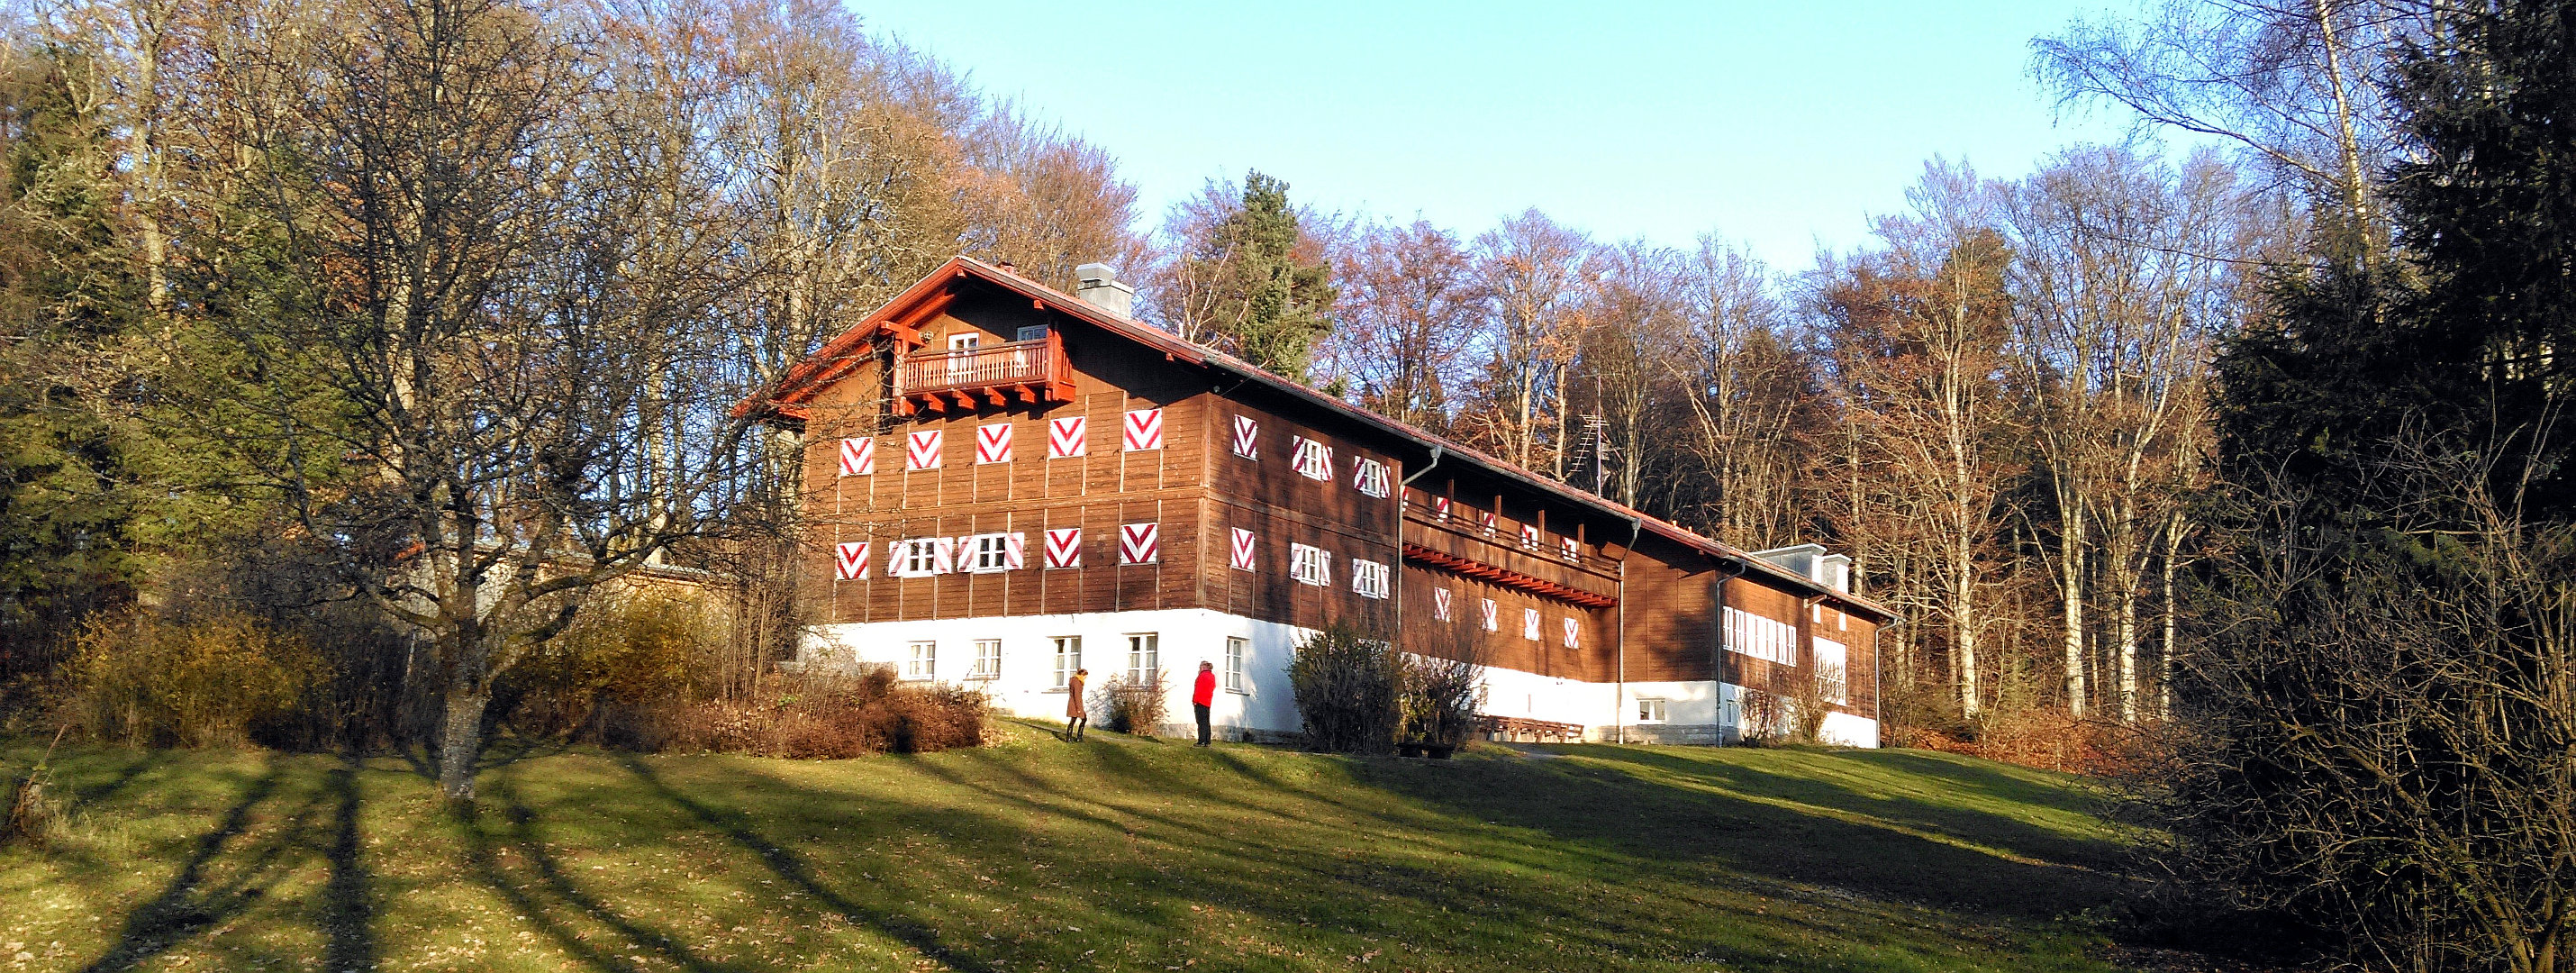 Photo of the retreat center Tharpaling in the German Bavarian Forest